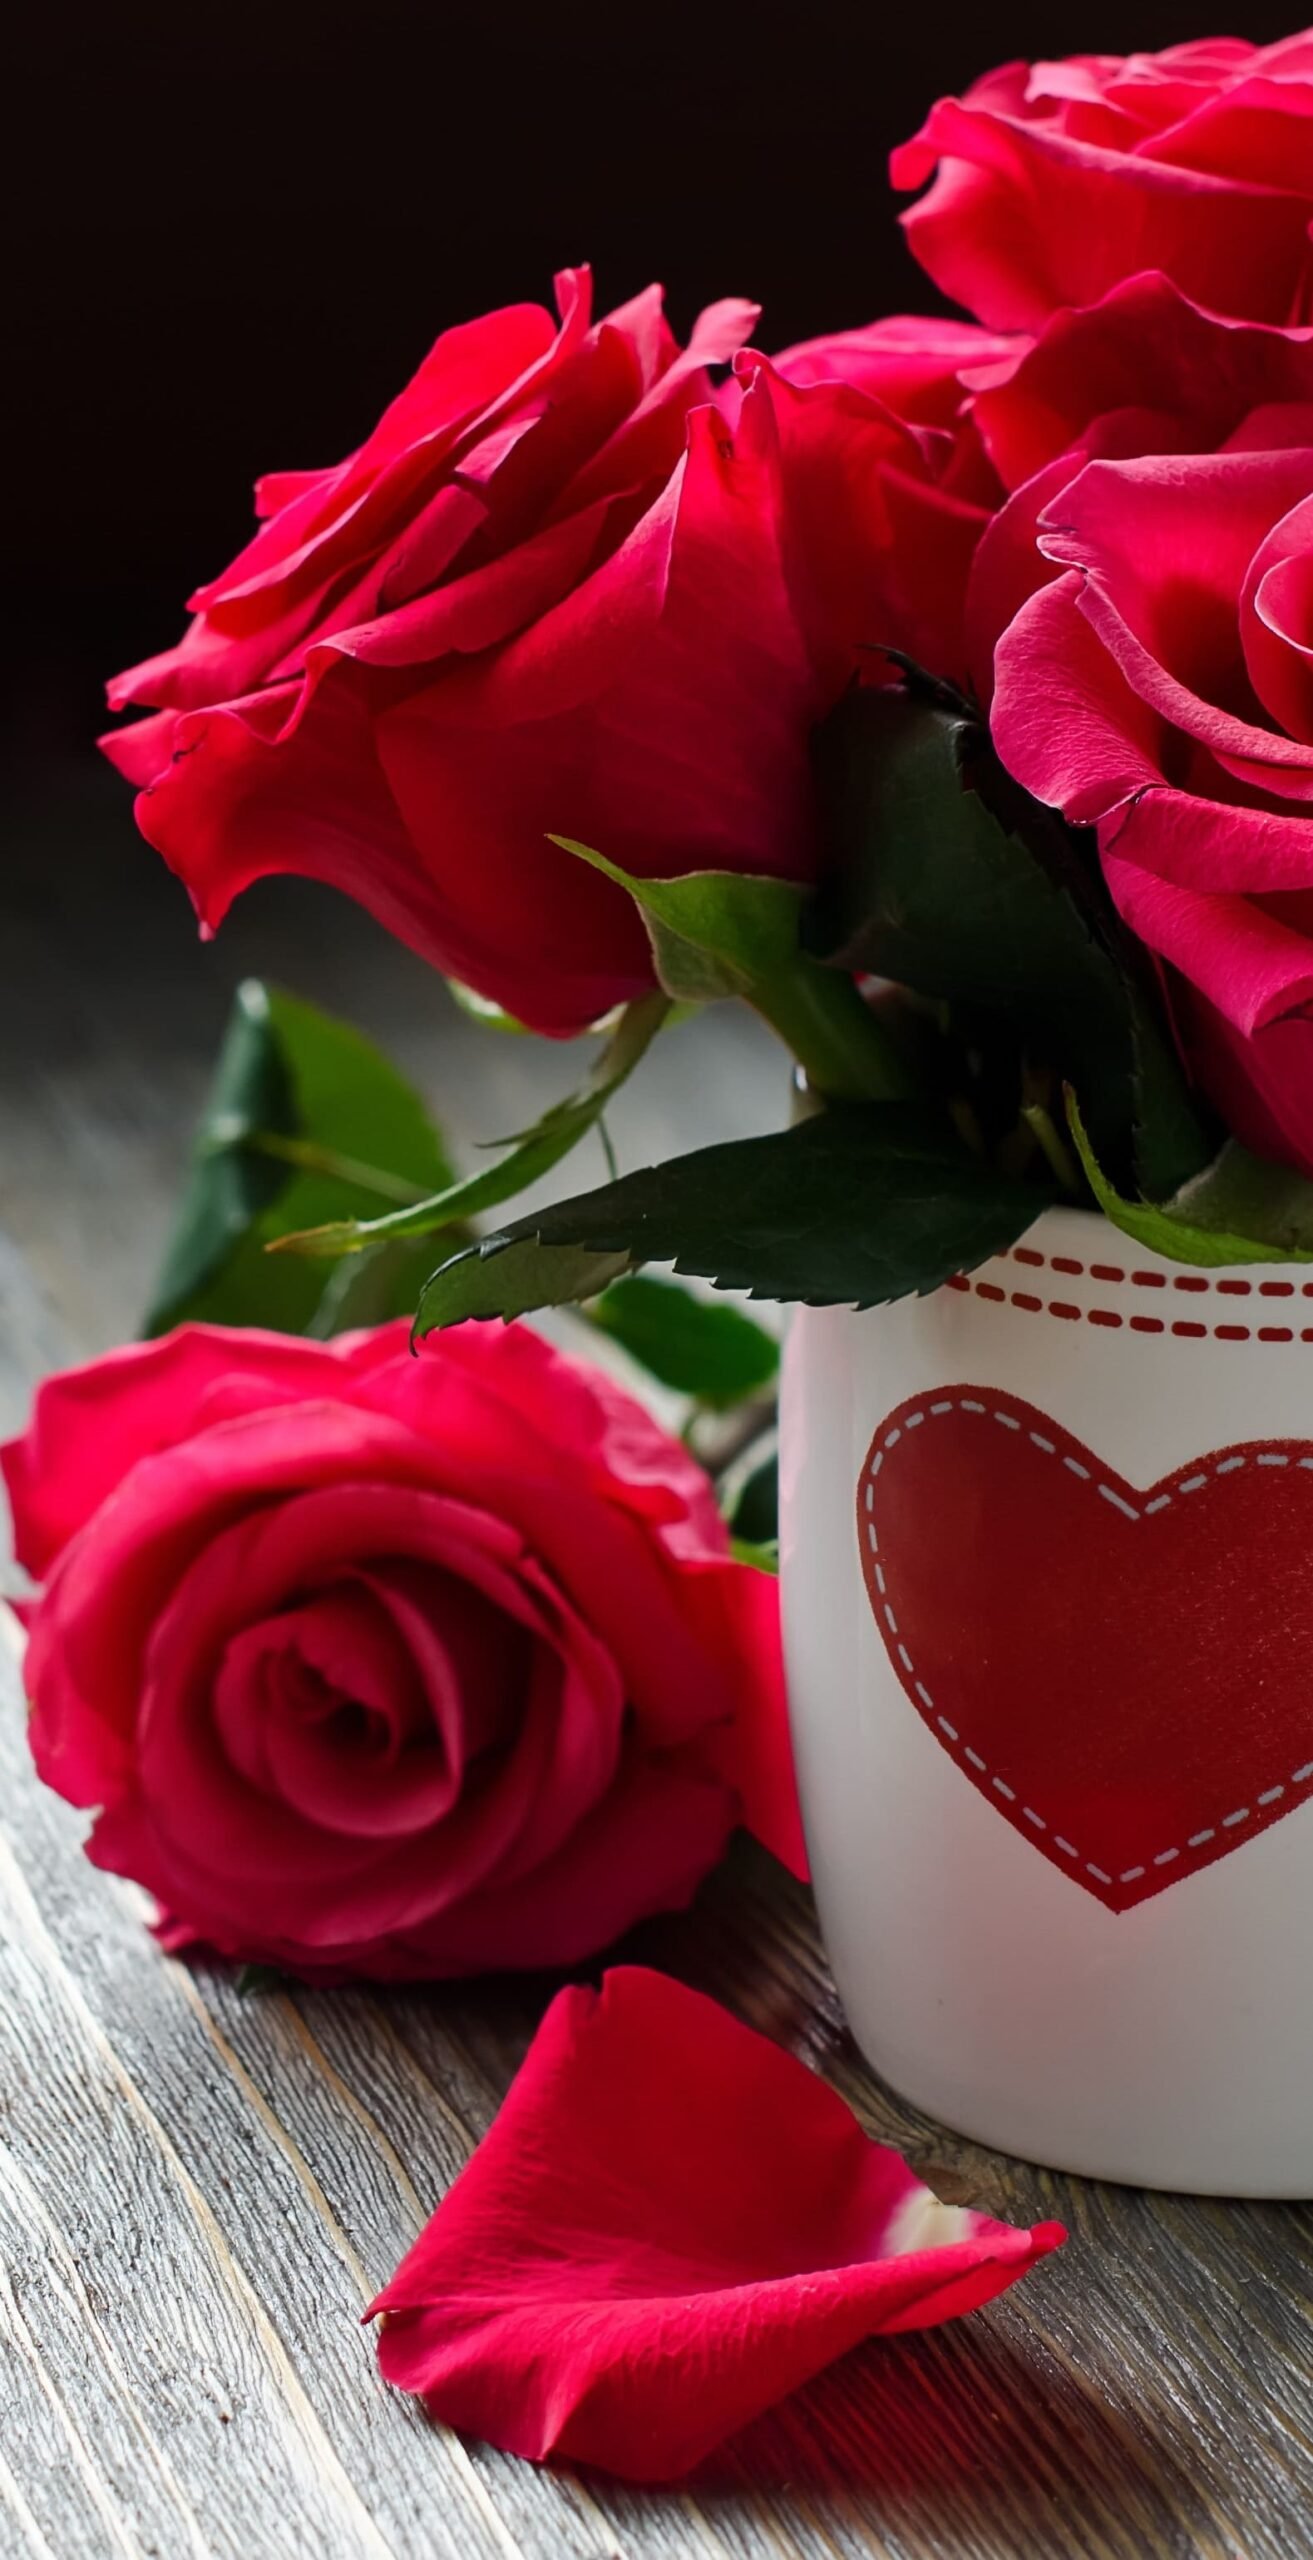 HD wallpaper Roses flowers heart red rose with white ceramic coffee cup Valentines Day cards scaled